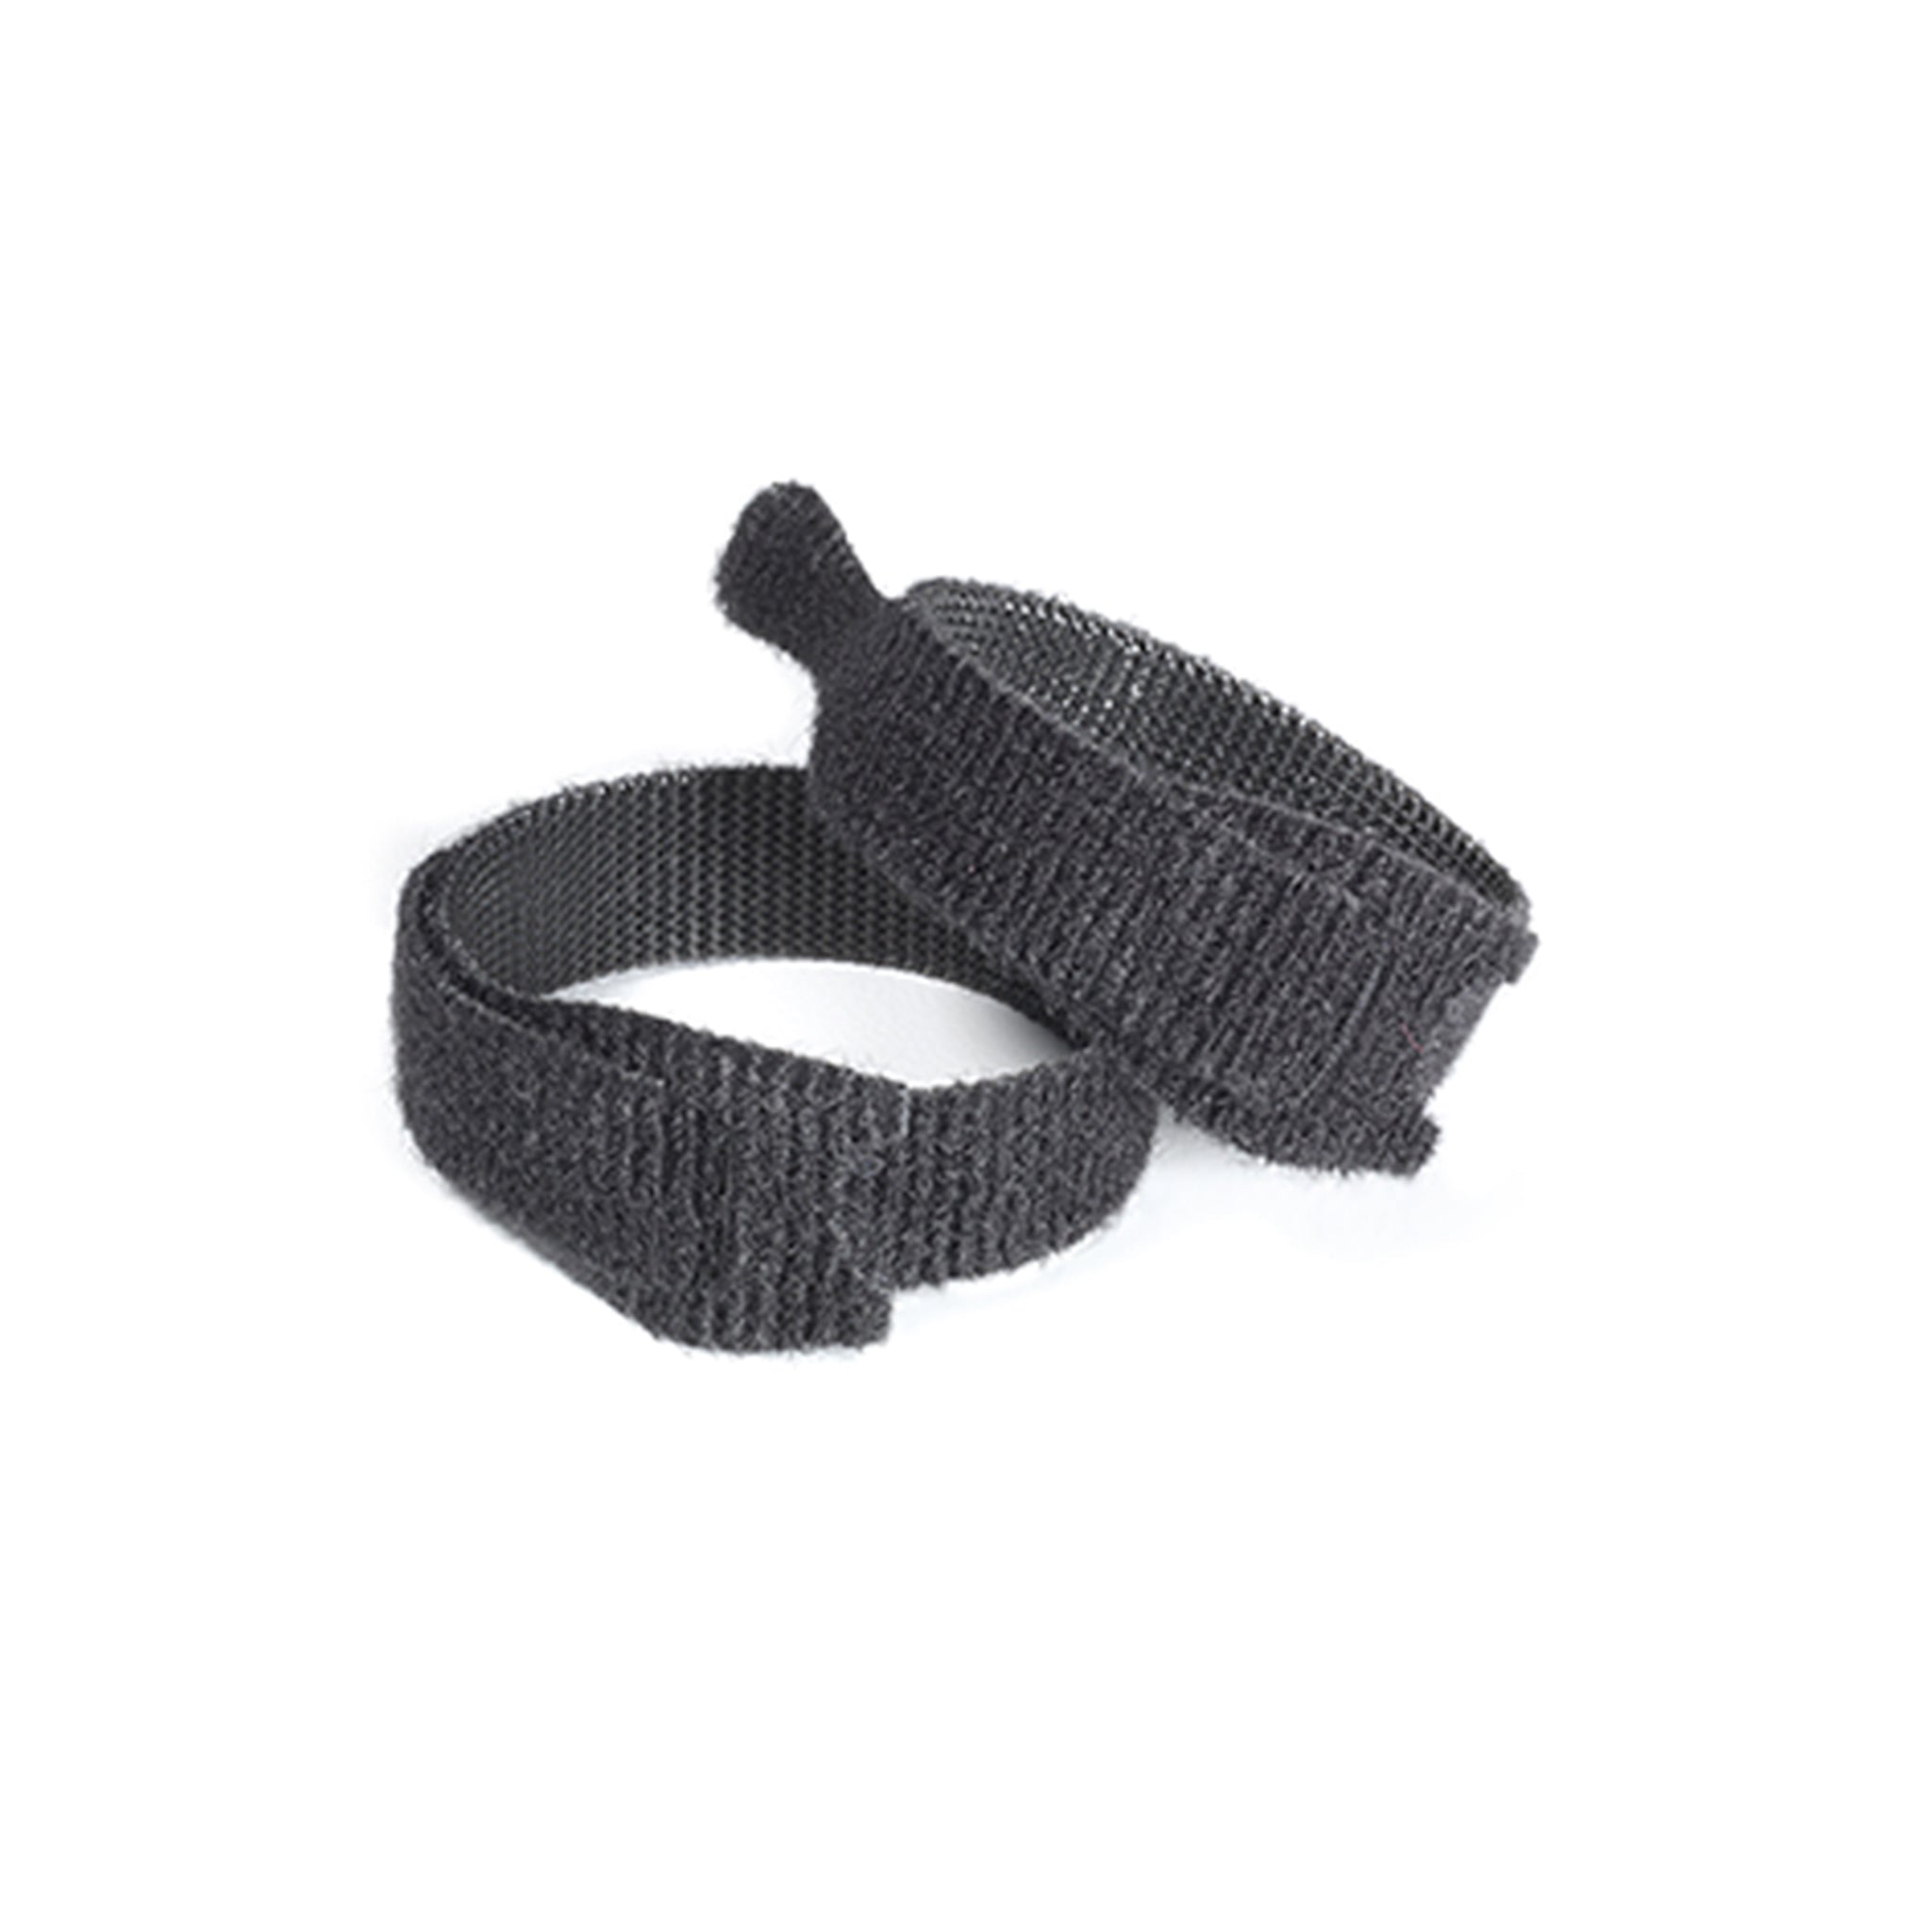 VELCRO® Brand Industrial Tape, Hook 88 and Loop 1000 Woven Nylon